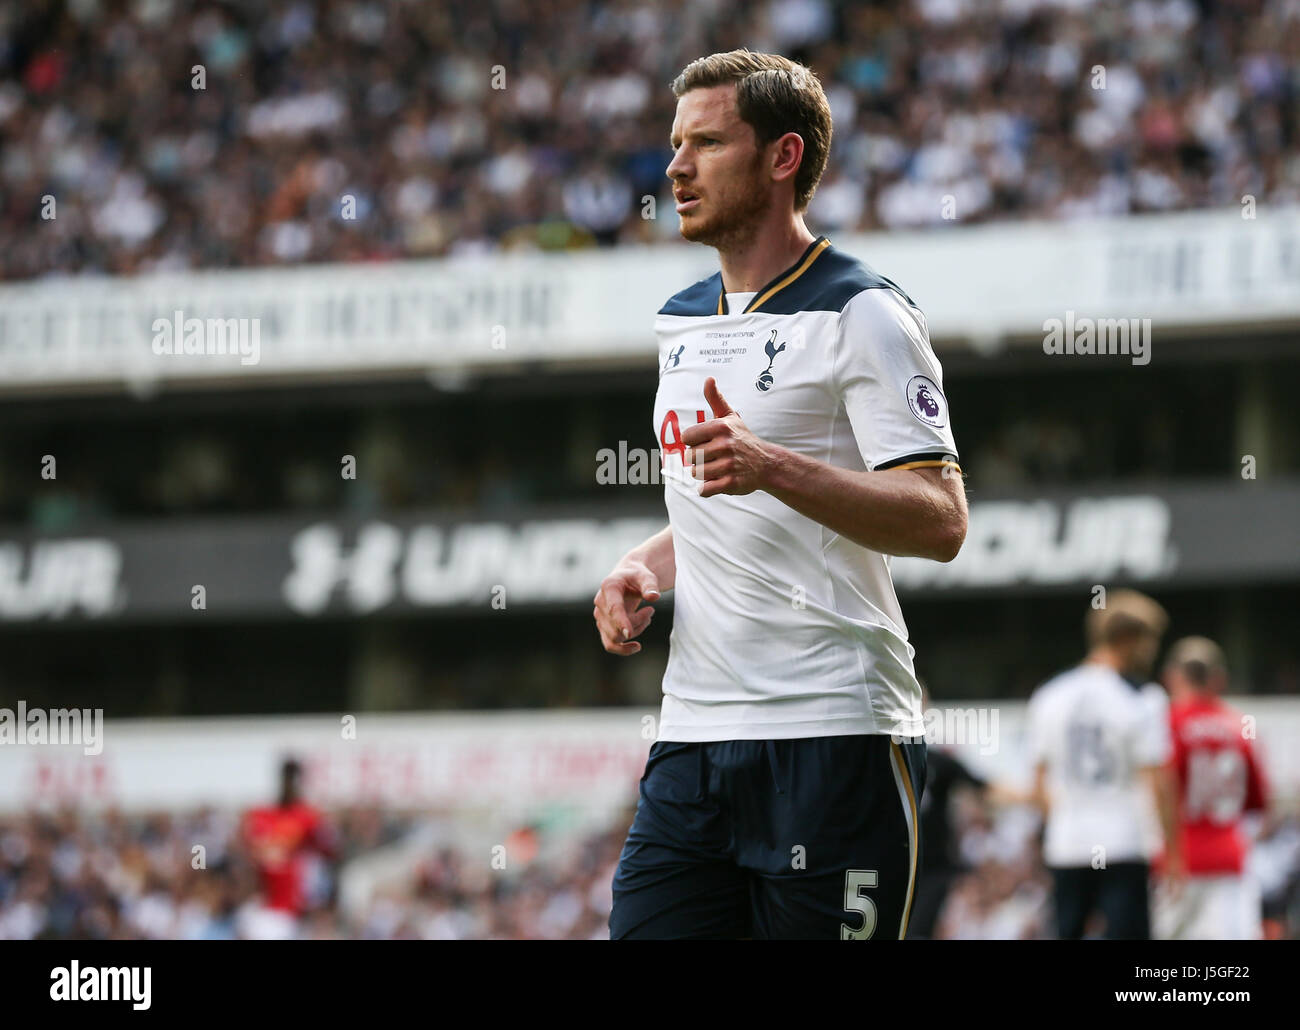 Jan Vertonghen of Tottenham Hotspur during the Premier League match between Tottenham Hotspur and Manchester United at White Hart Lane in London. 14 May 2017 EDITORIAL USE ONLY . No merchandising. For Football images FA and Premier League restrictions apply inc. no internet/mobile usage without FAPL license - for details contact Football Dataco ARRON GENT/TELEPHOTO IMAGES Stock Photo